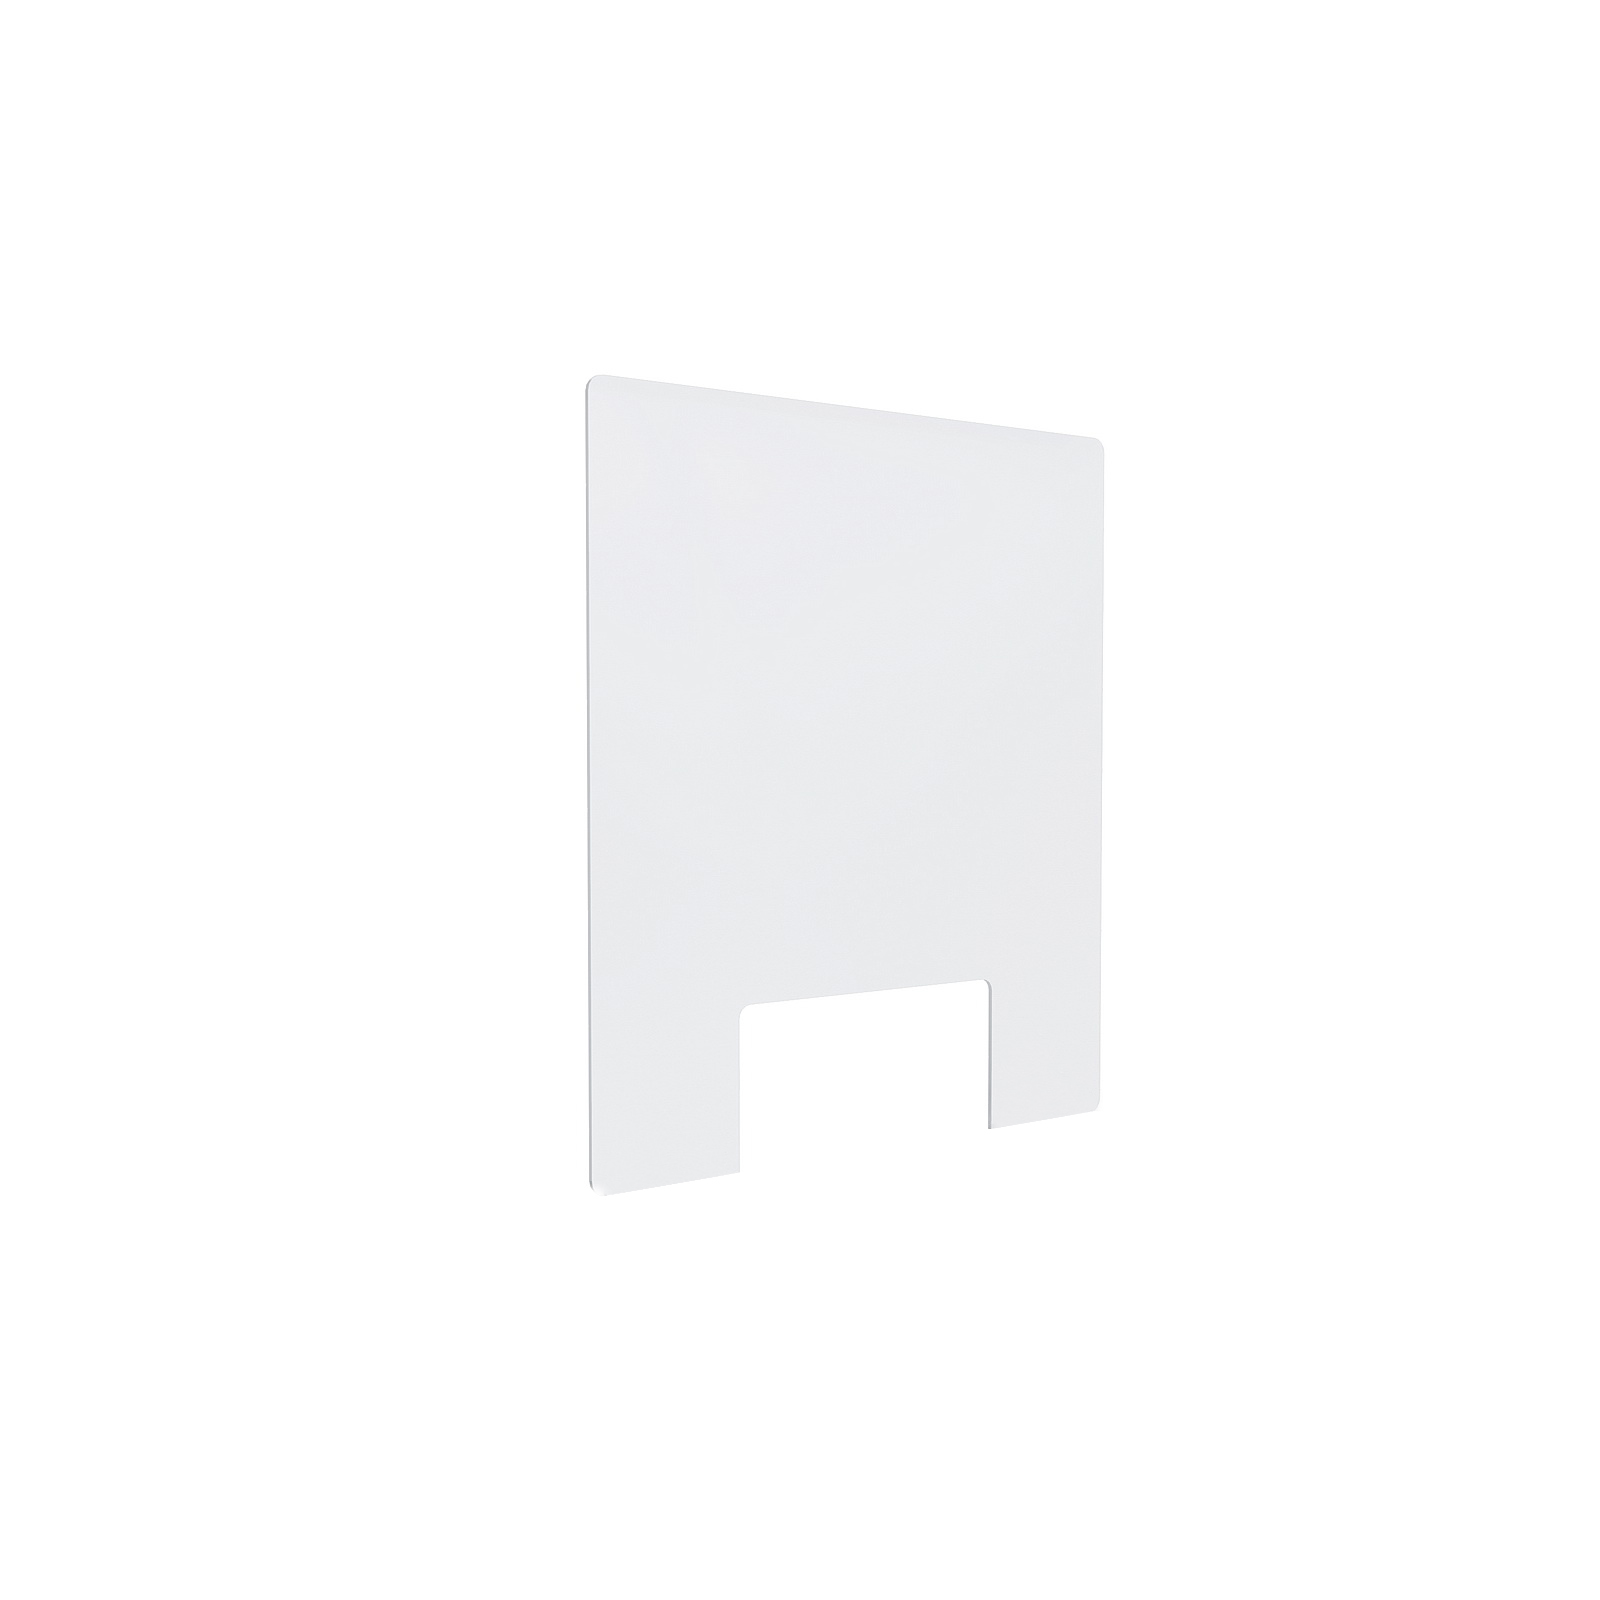 Clear Acrylic Sneeze Guard 20'' Wide x 23-1/2'' Tall (10'' x 5'' Cut Out) x 0.157'' Thickness